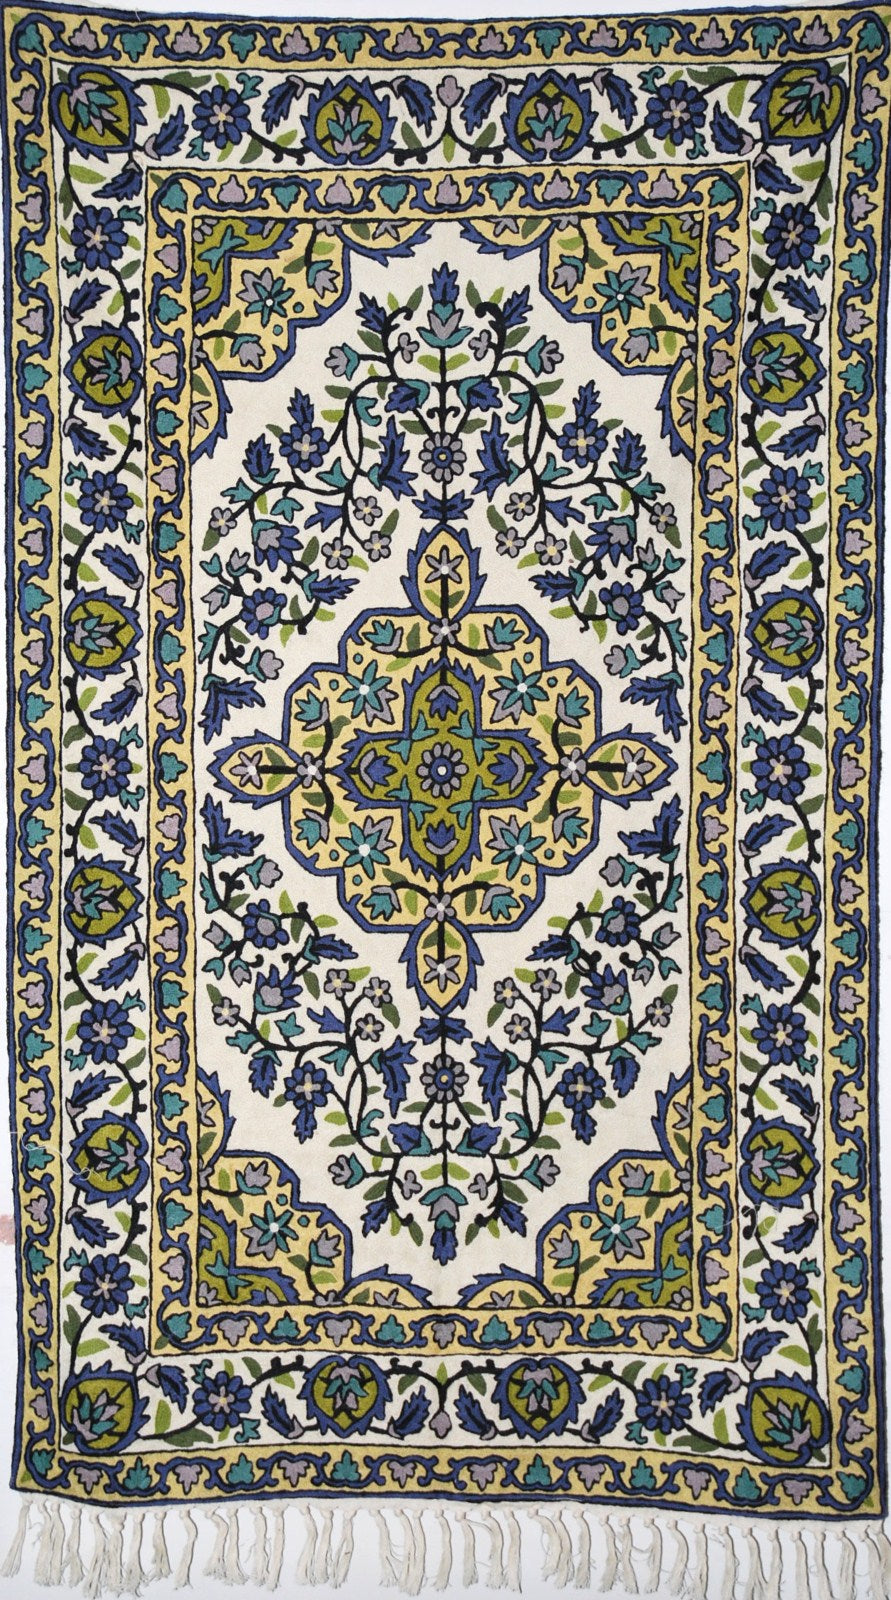 Kashmiri Wool Tapestry Area Rug, Multicolor Embroidery 3x5 feet #CWR15125